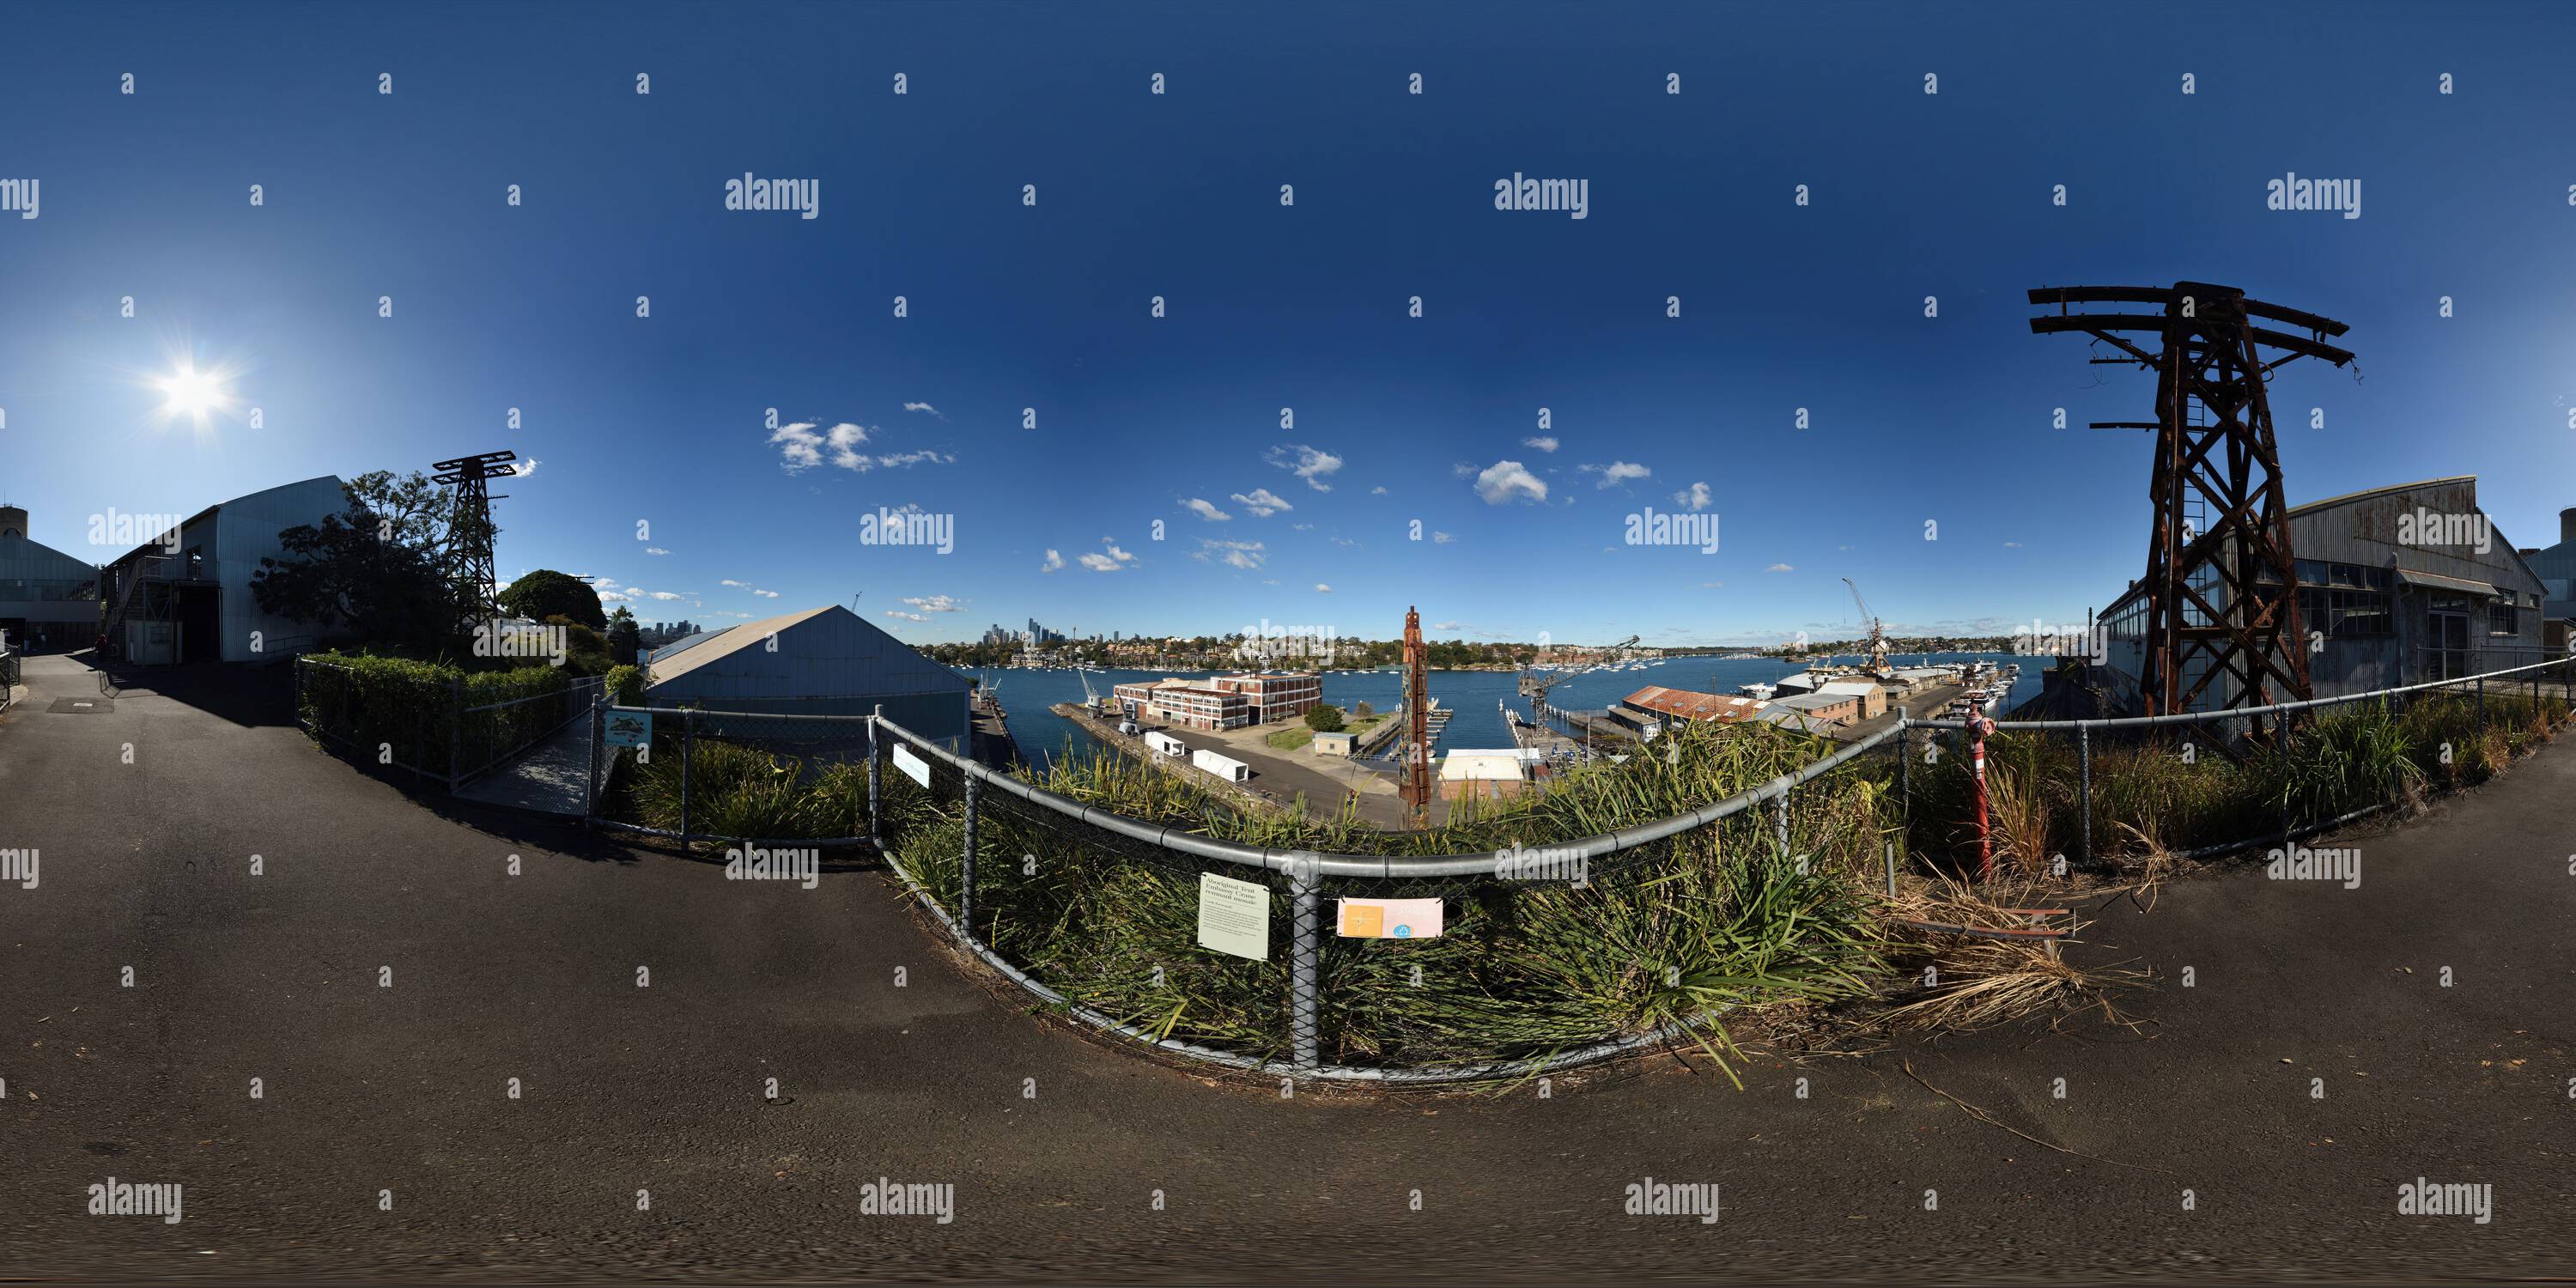 360 degree panoramic view of 360° Panorama The Fitzroy and Sutherland Docks from above, the Aboriginal Tent Embassy Tower Mural, Ship Building & Docks Precinct at Cockatoo Island